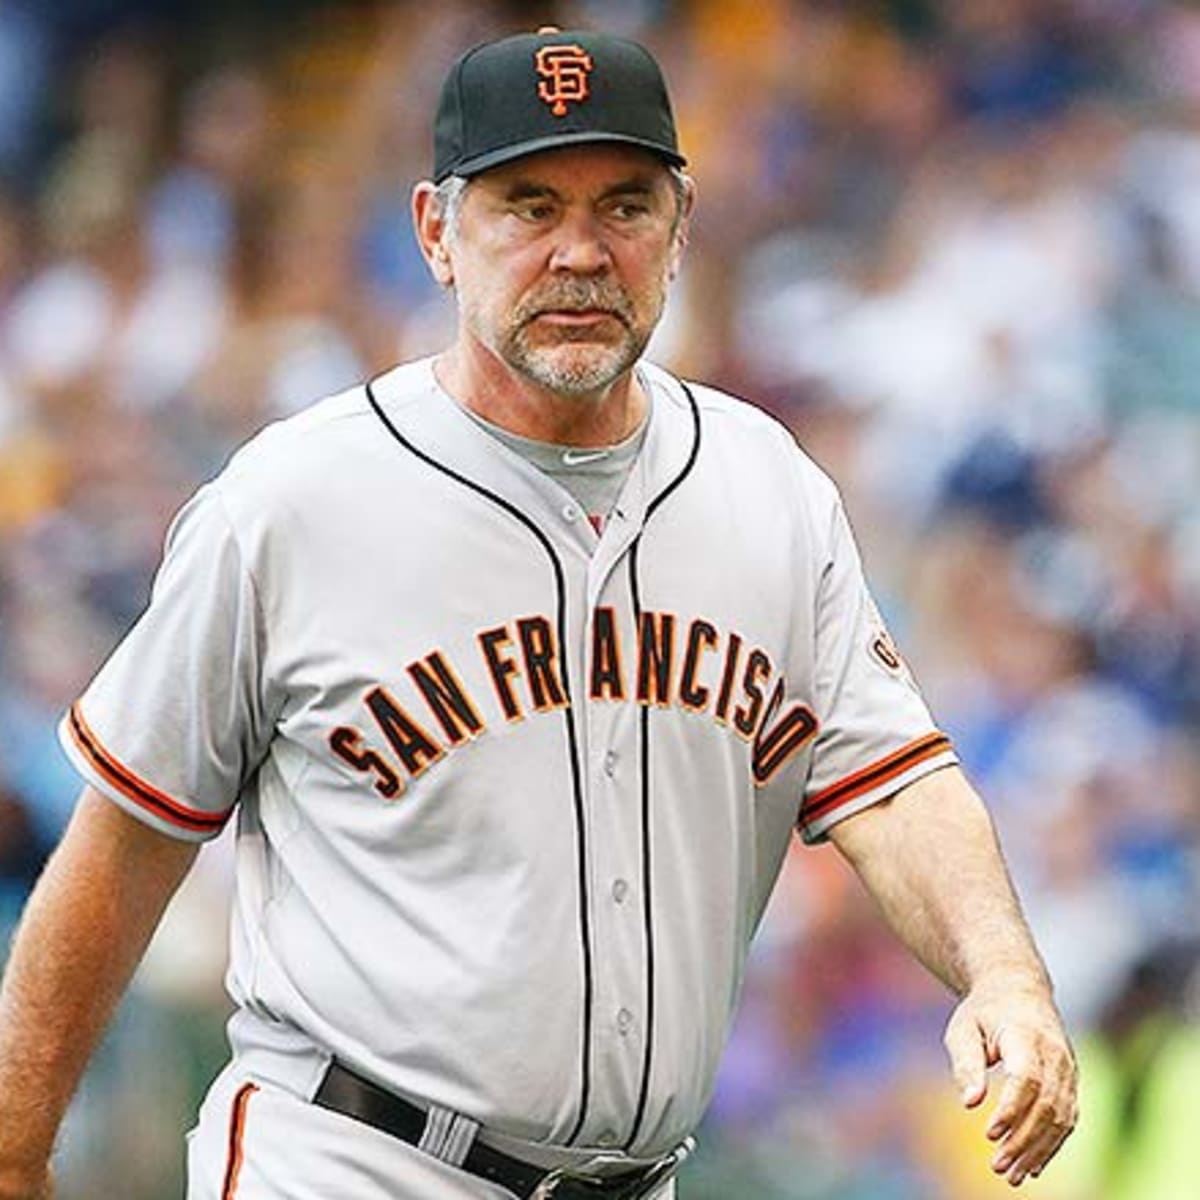 Ranking All 30 Managers in Major League Baseball - AthlonSports